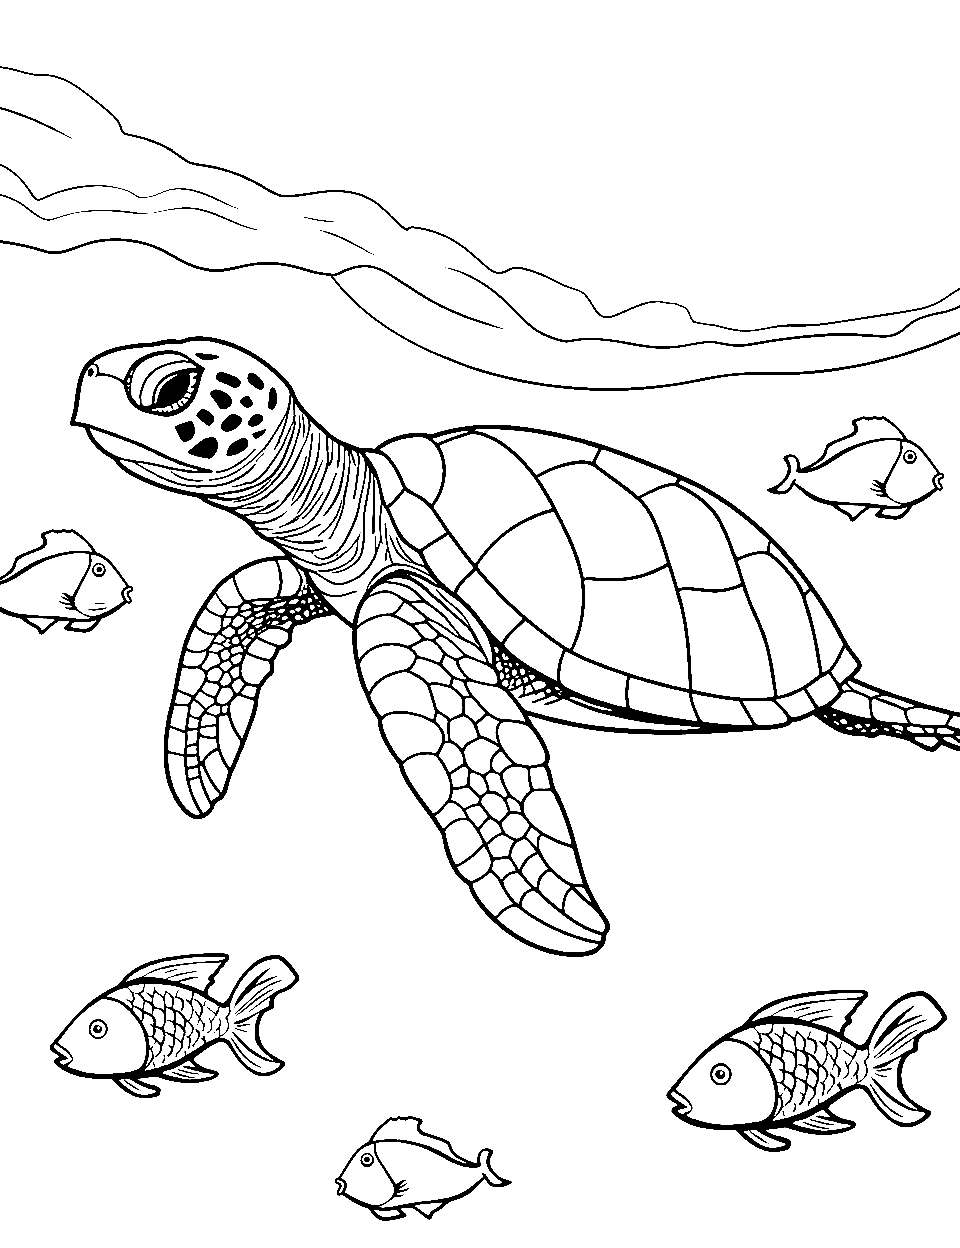 Graceful Sea Turtle Ocean Coloring Page - A sea turtle swimming near the surface of the water.